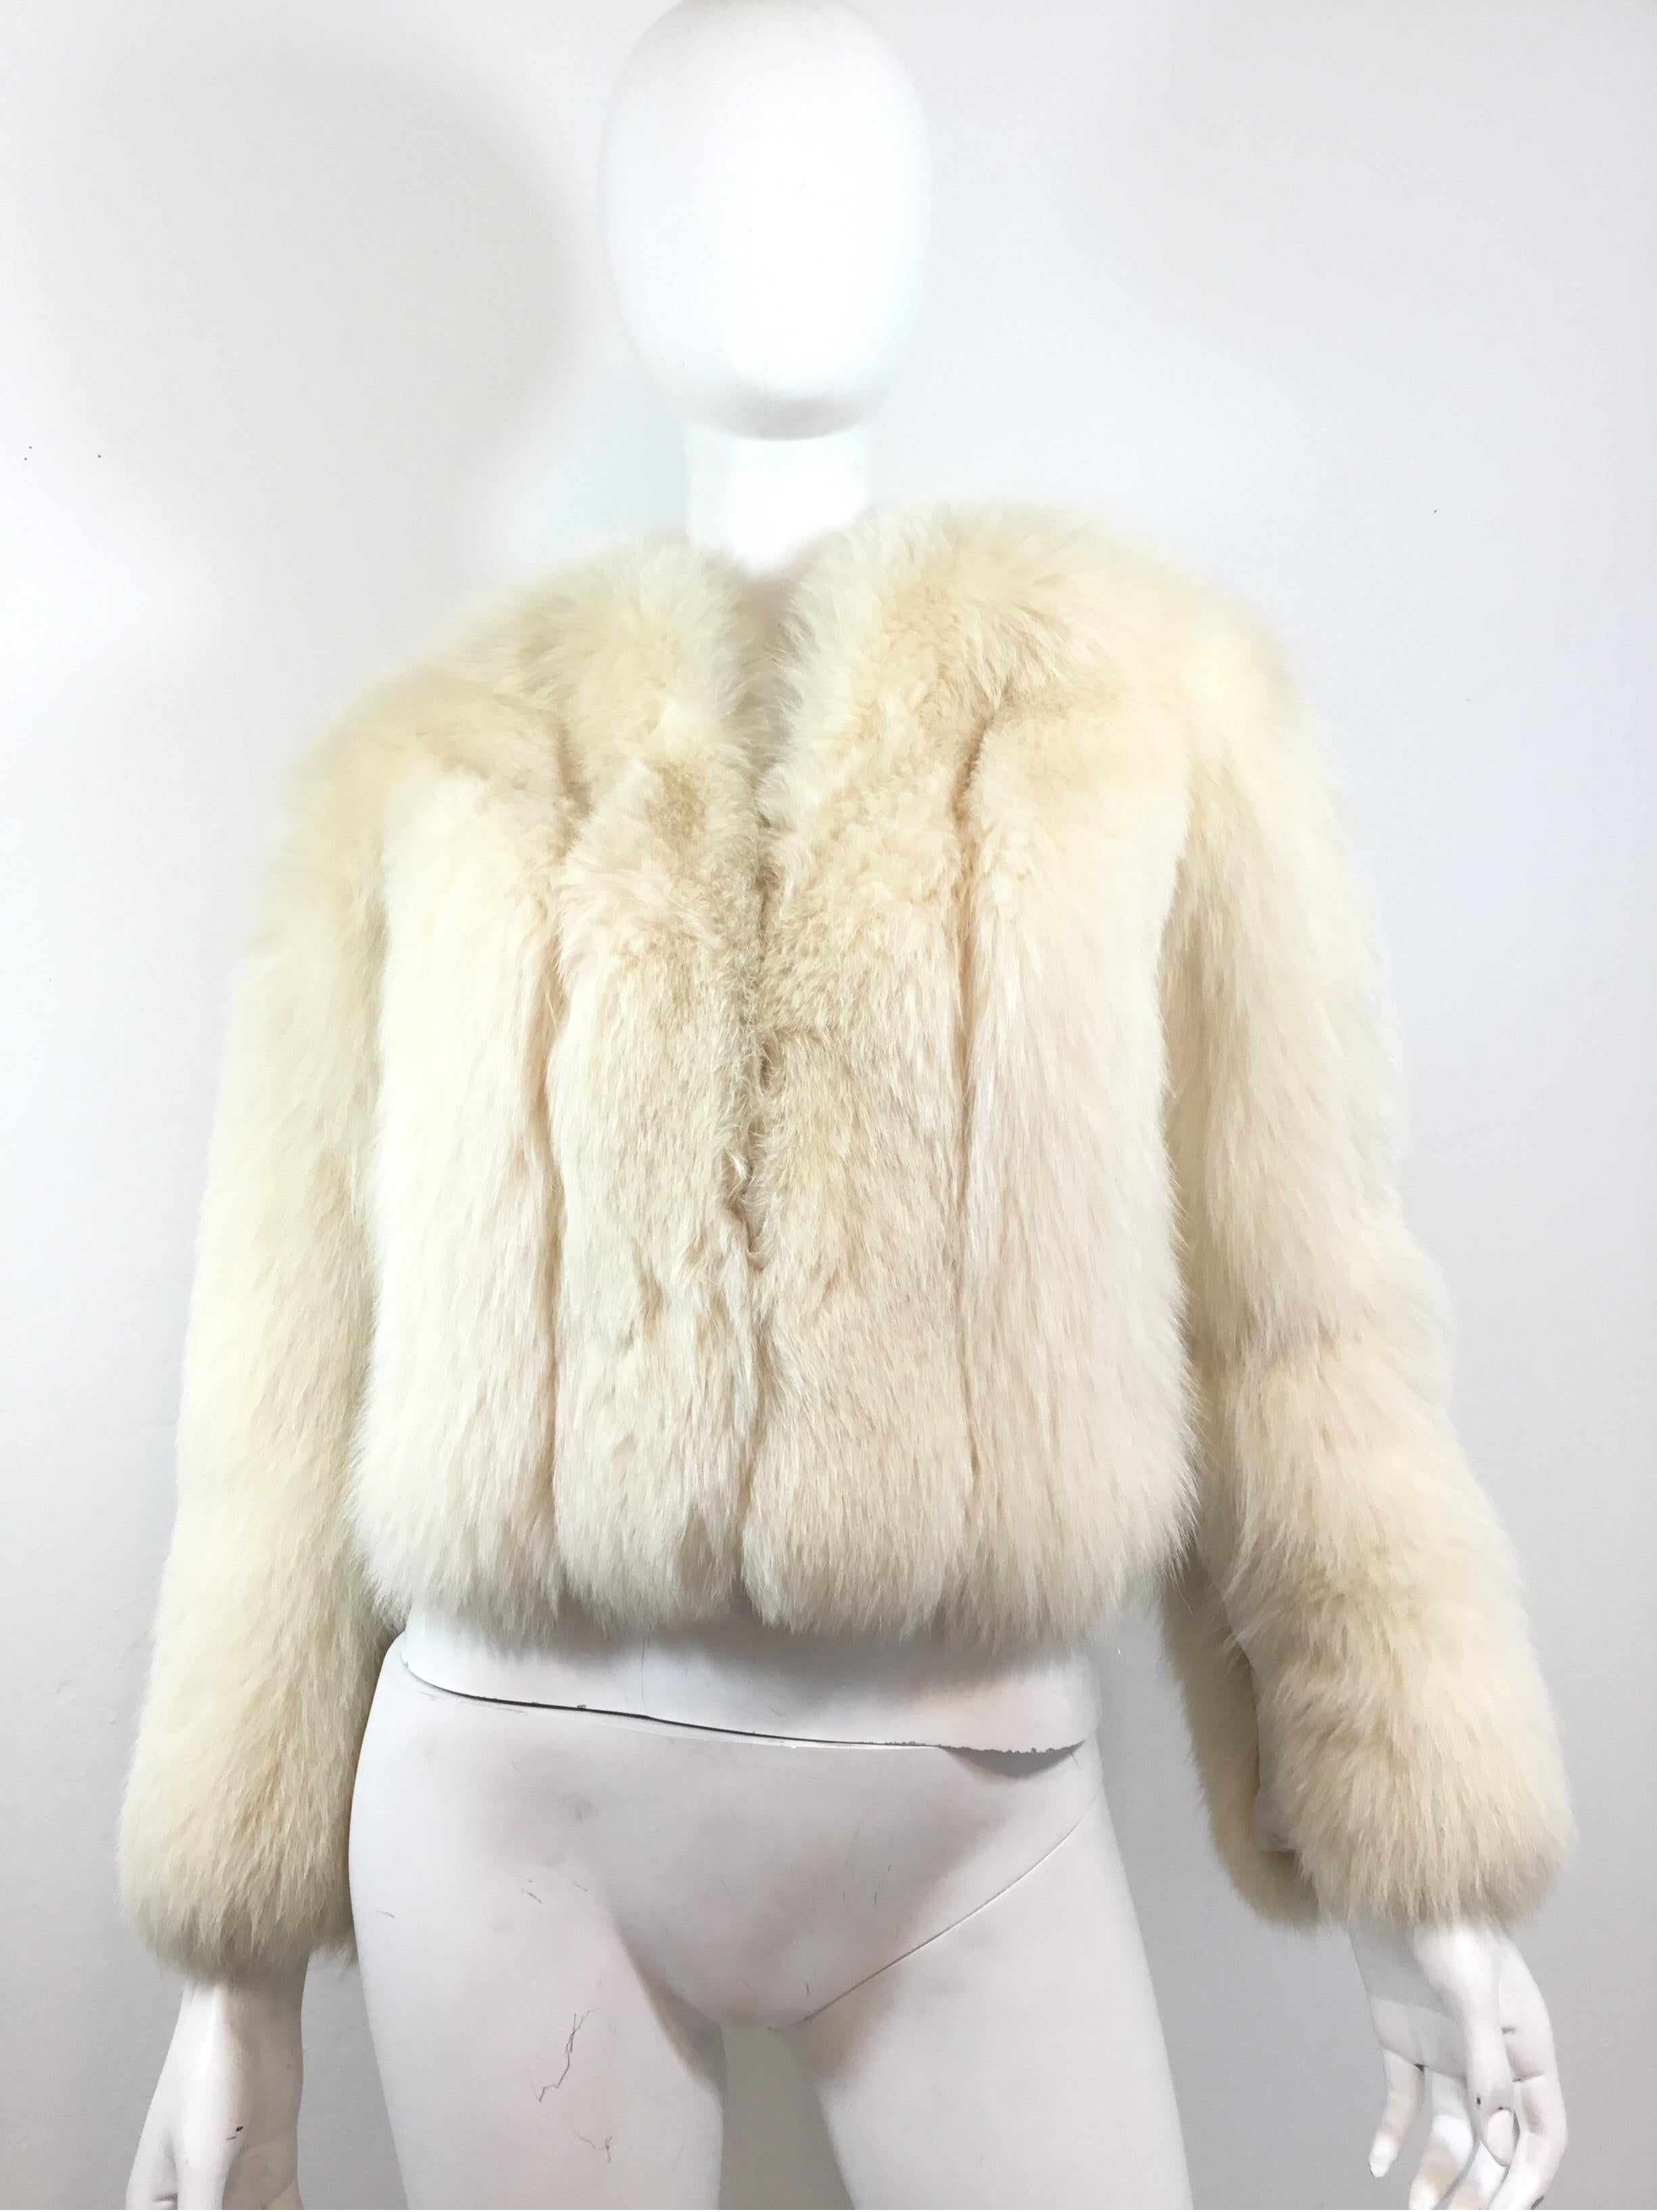 Sakowitz Vintage Fox fur chubby jacket featured in an ivory color with leather panels at the sides and under the sleeves. Hook closures along the front. Jacket has been fully re-lined and is in great vintage condition. Light wear to the leather